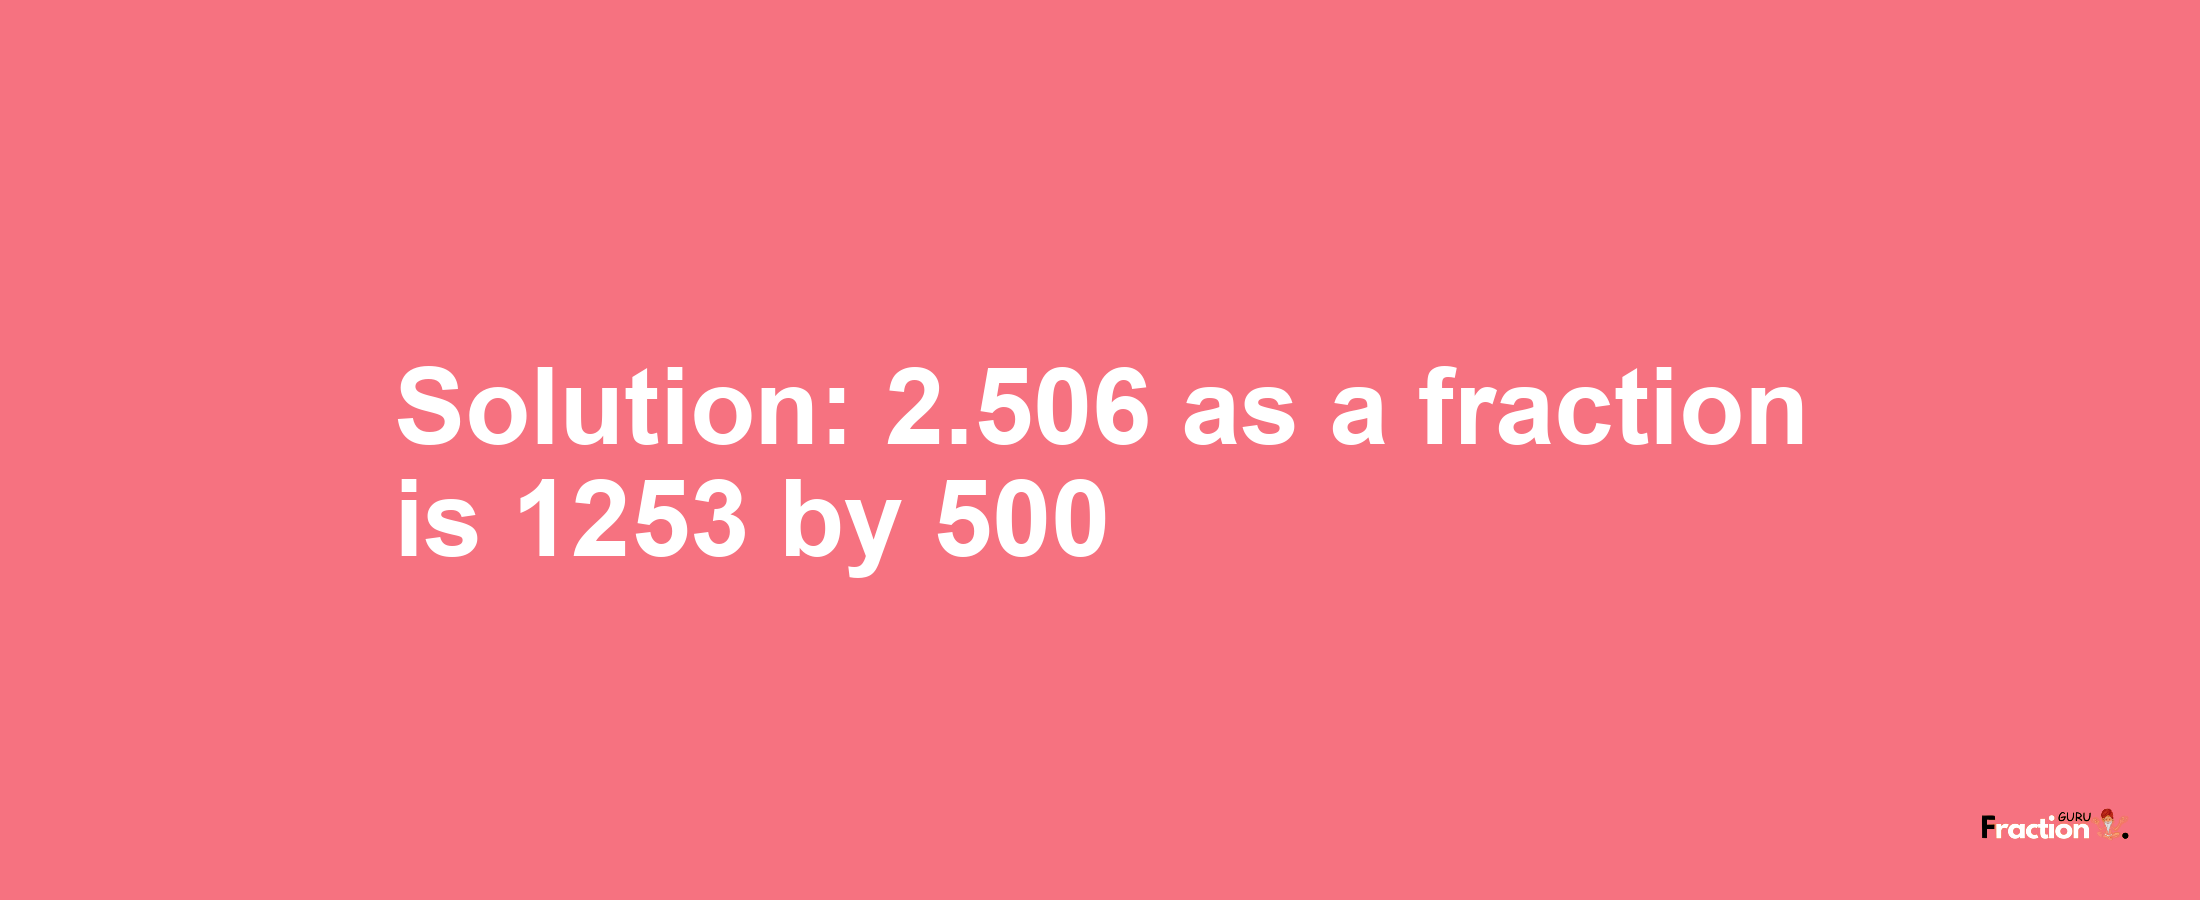 Solution:2.506 as a fraction is 1253/500